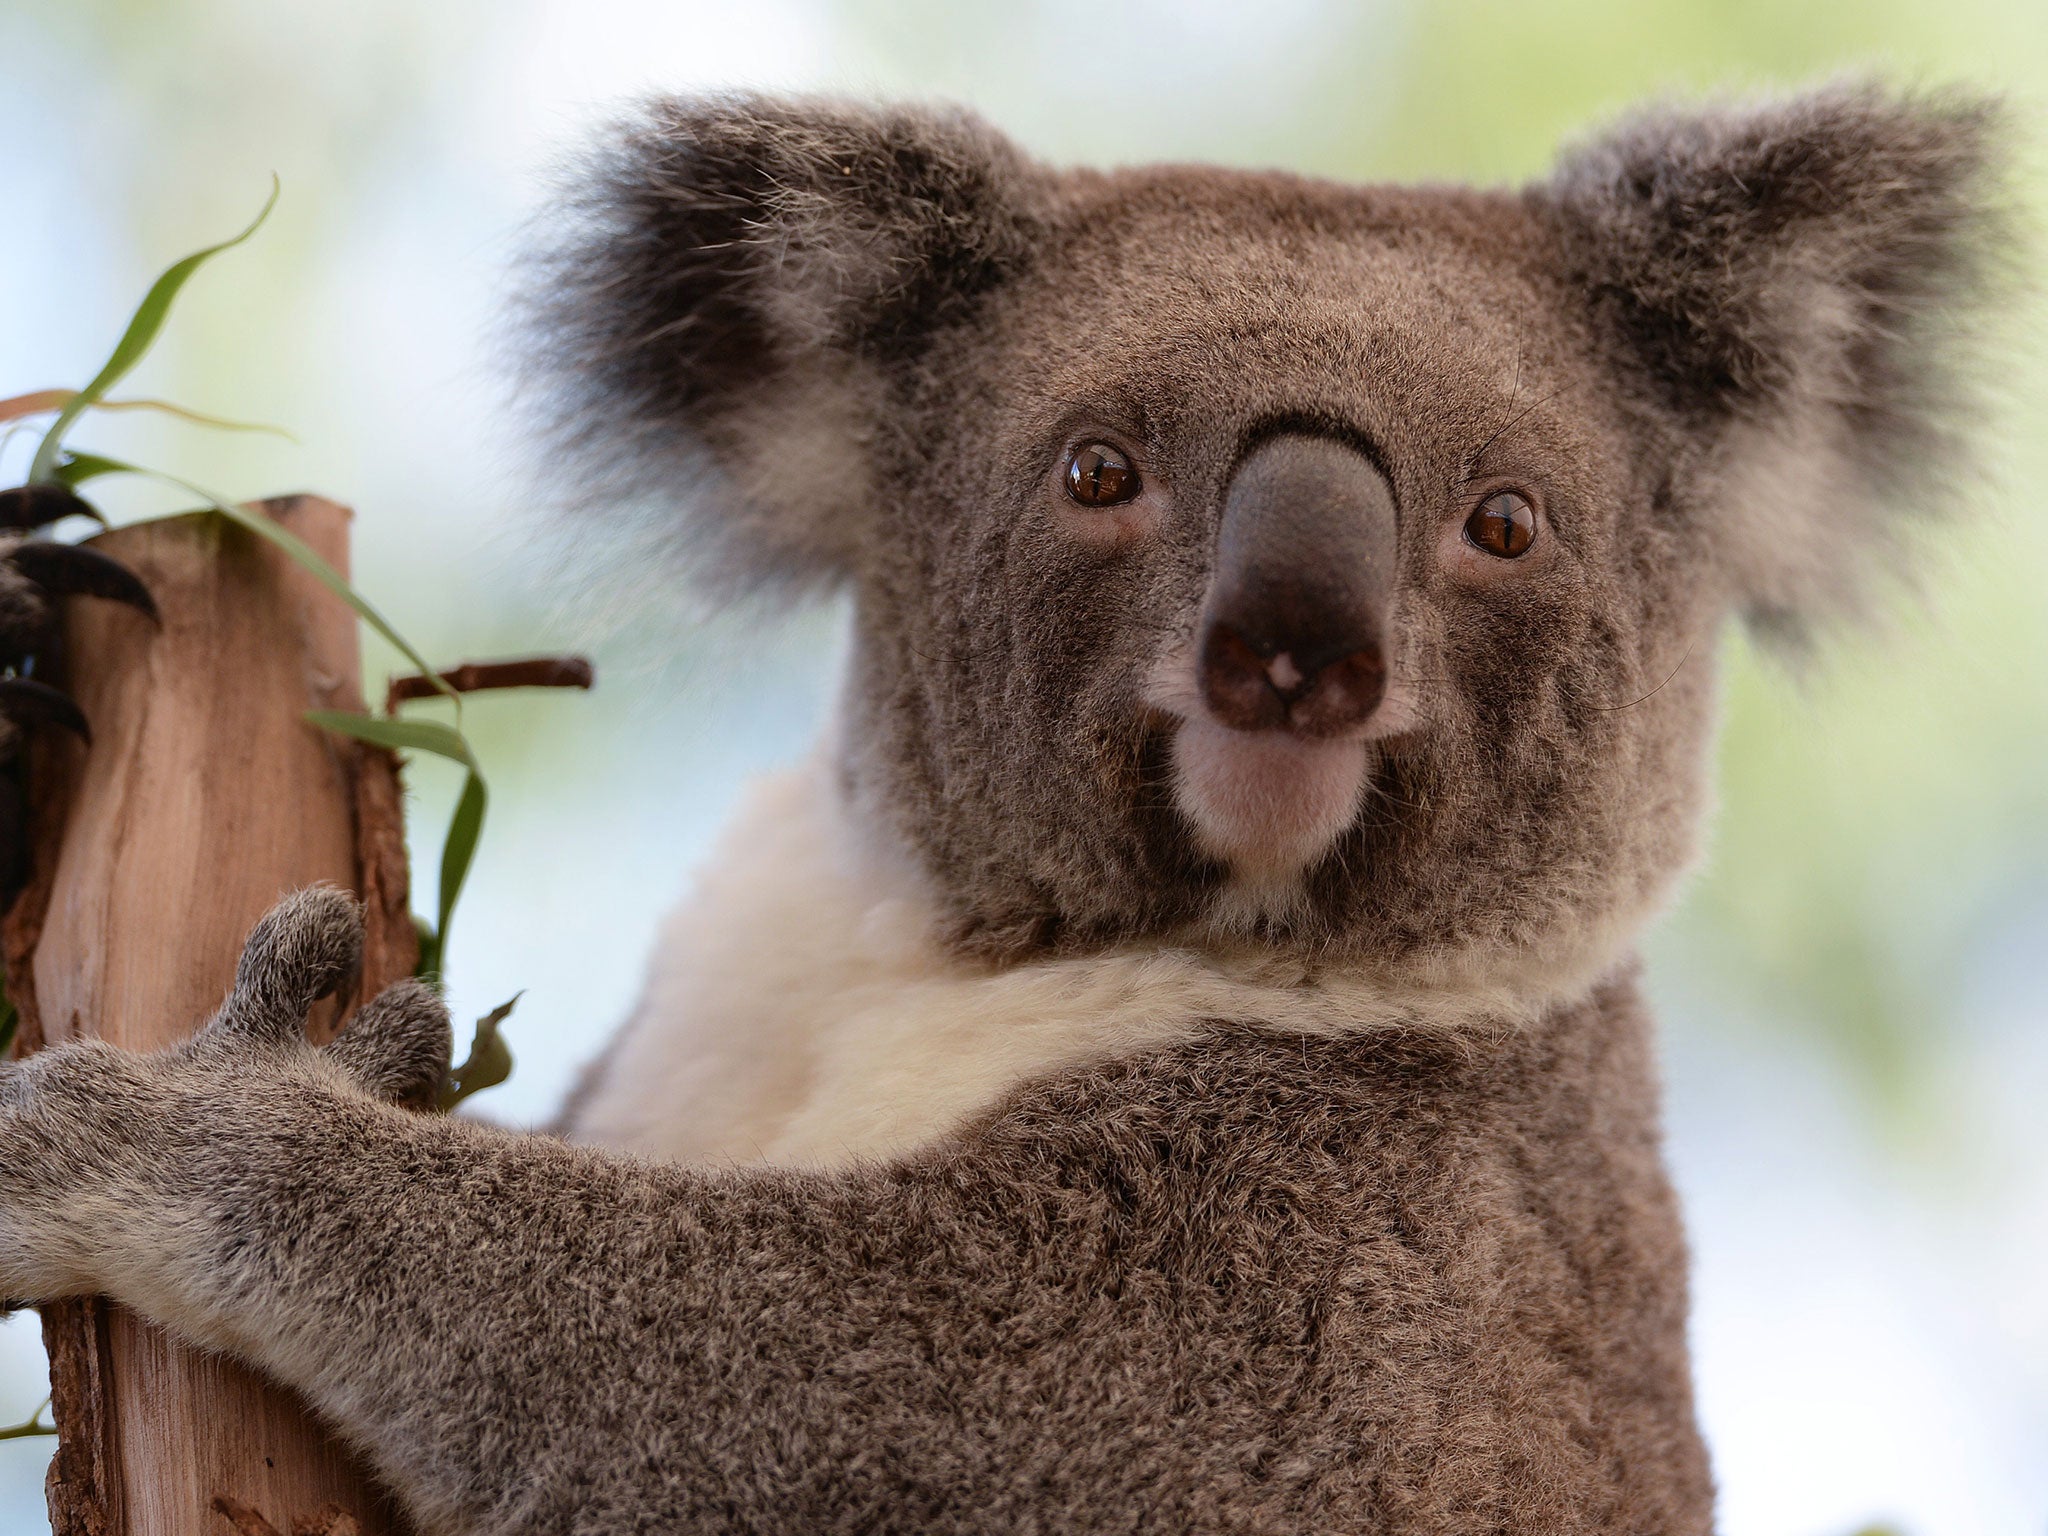 Almost 700 koalas were caught and killed in the same area over the last two years